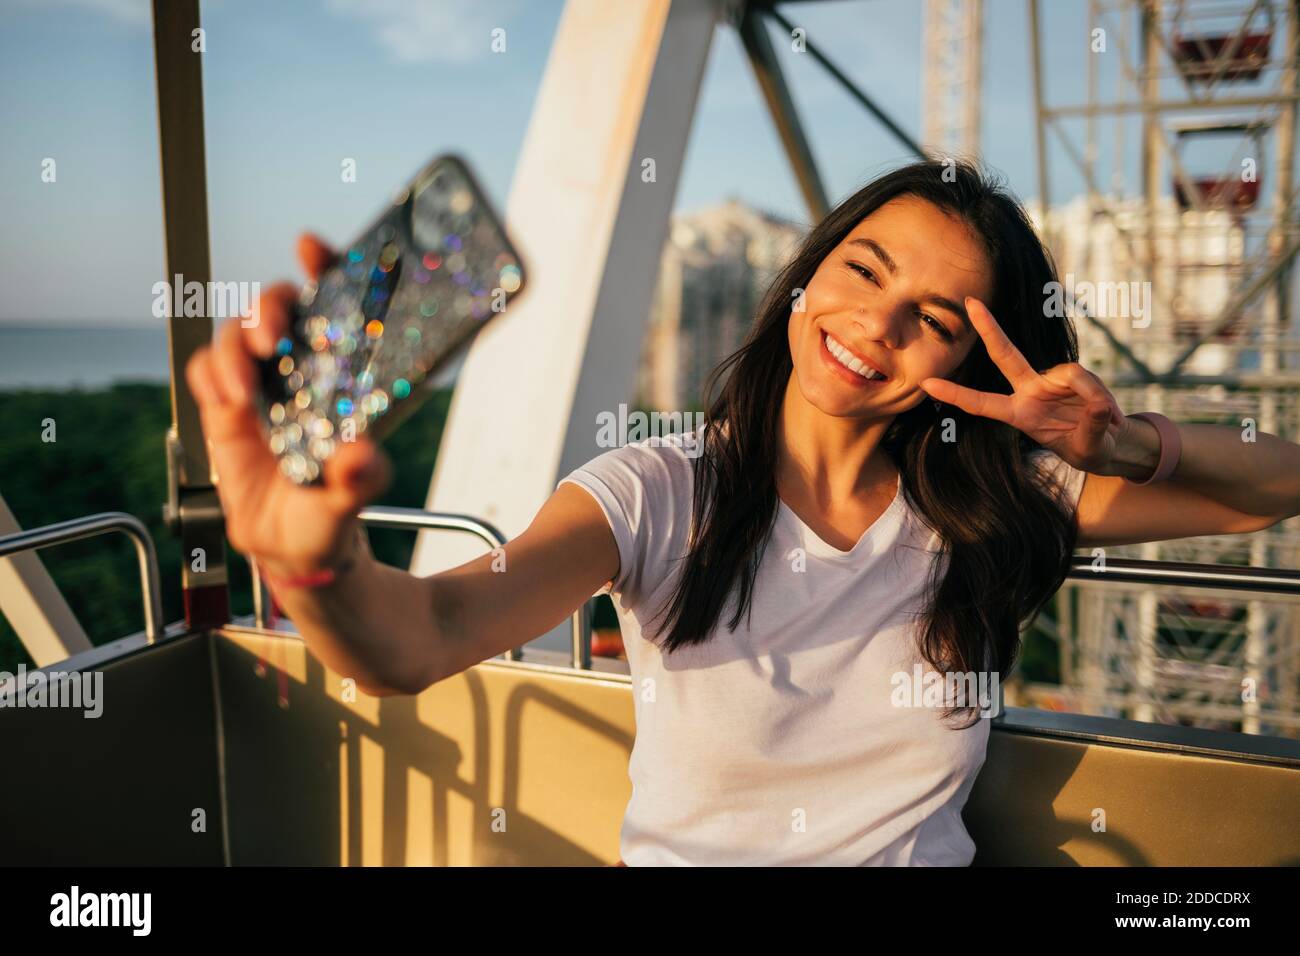 Cheerful young woman gesturing peace sign while taking selfie on Ferris wheel at amusement park Stock Photo